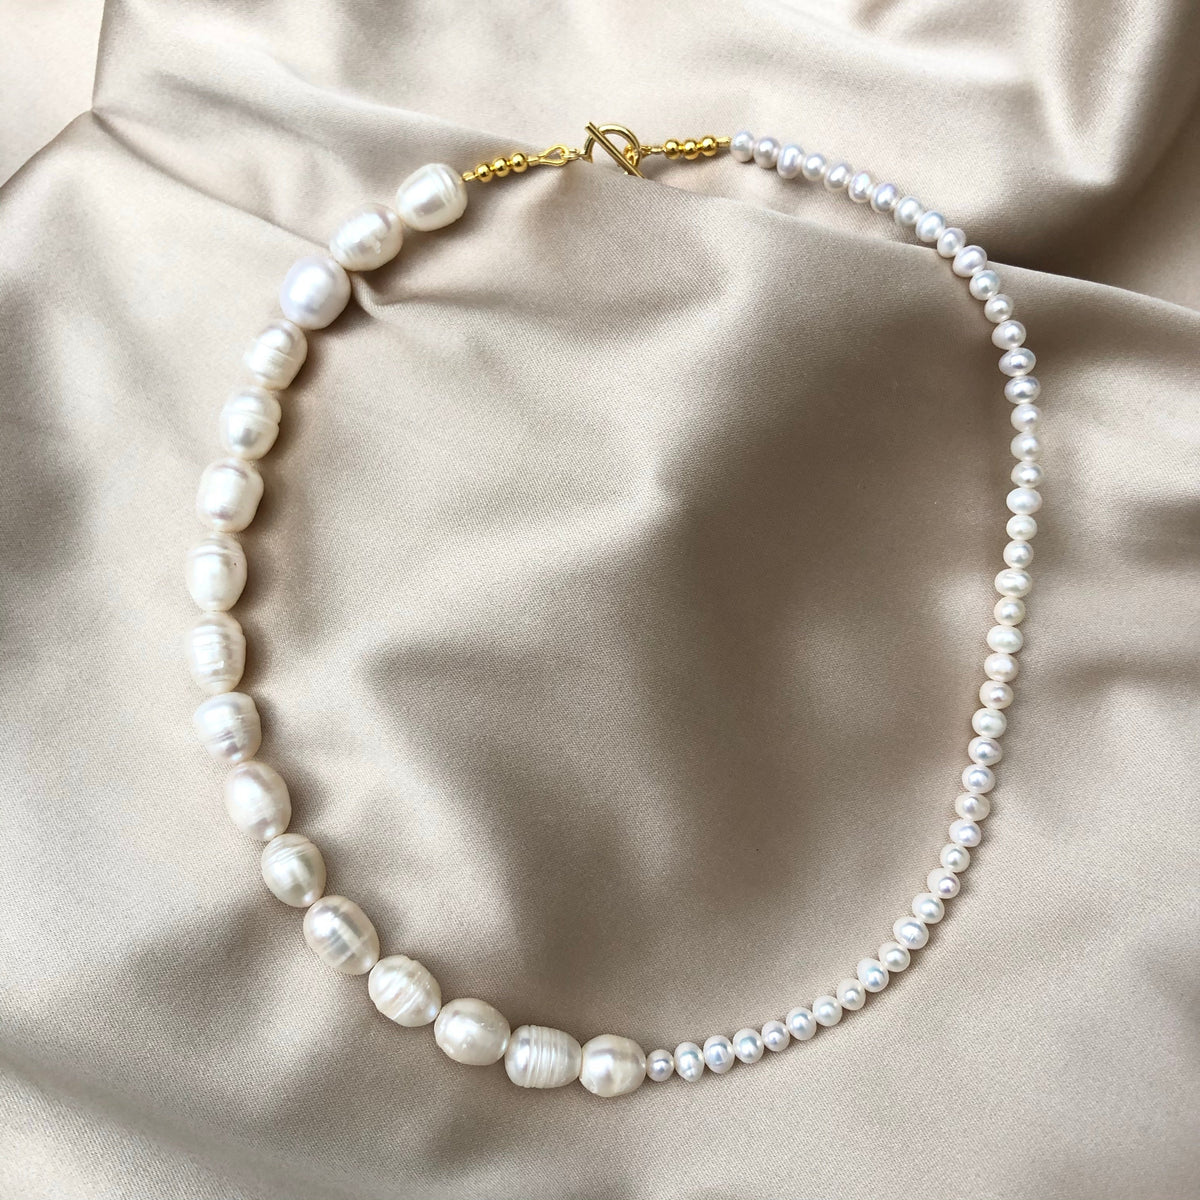 Life in Balance Necklace - White Freshwater Pearl Necklace